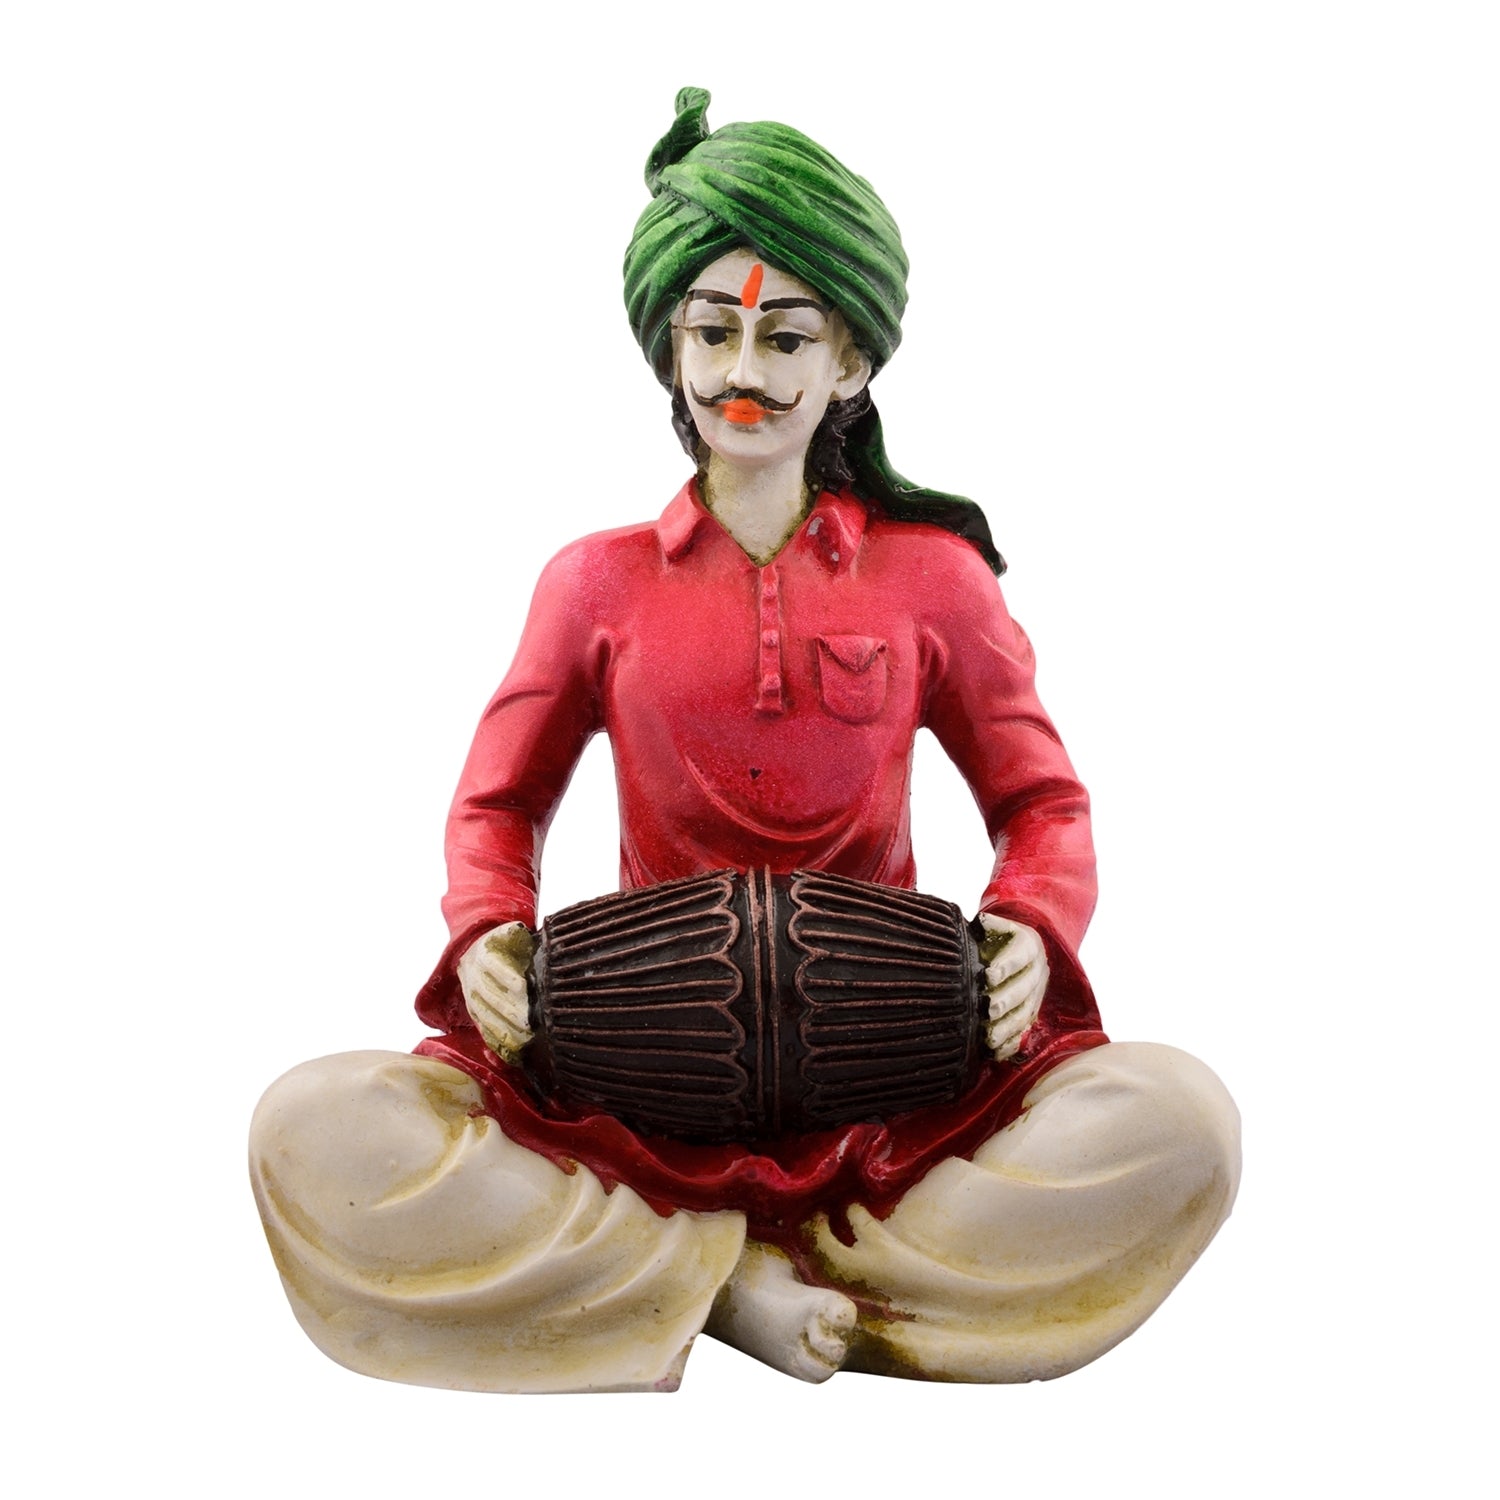 Polyresin Rajasthani Men Playing Dholak Handcrafted Decorative Showpiece (Pink and Green)